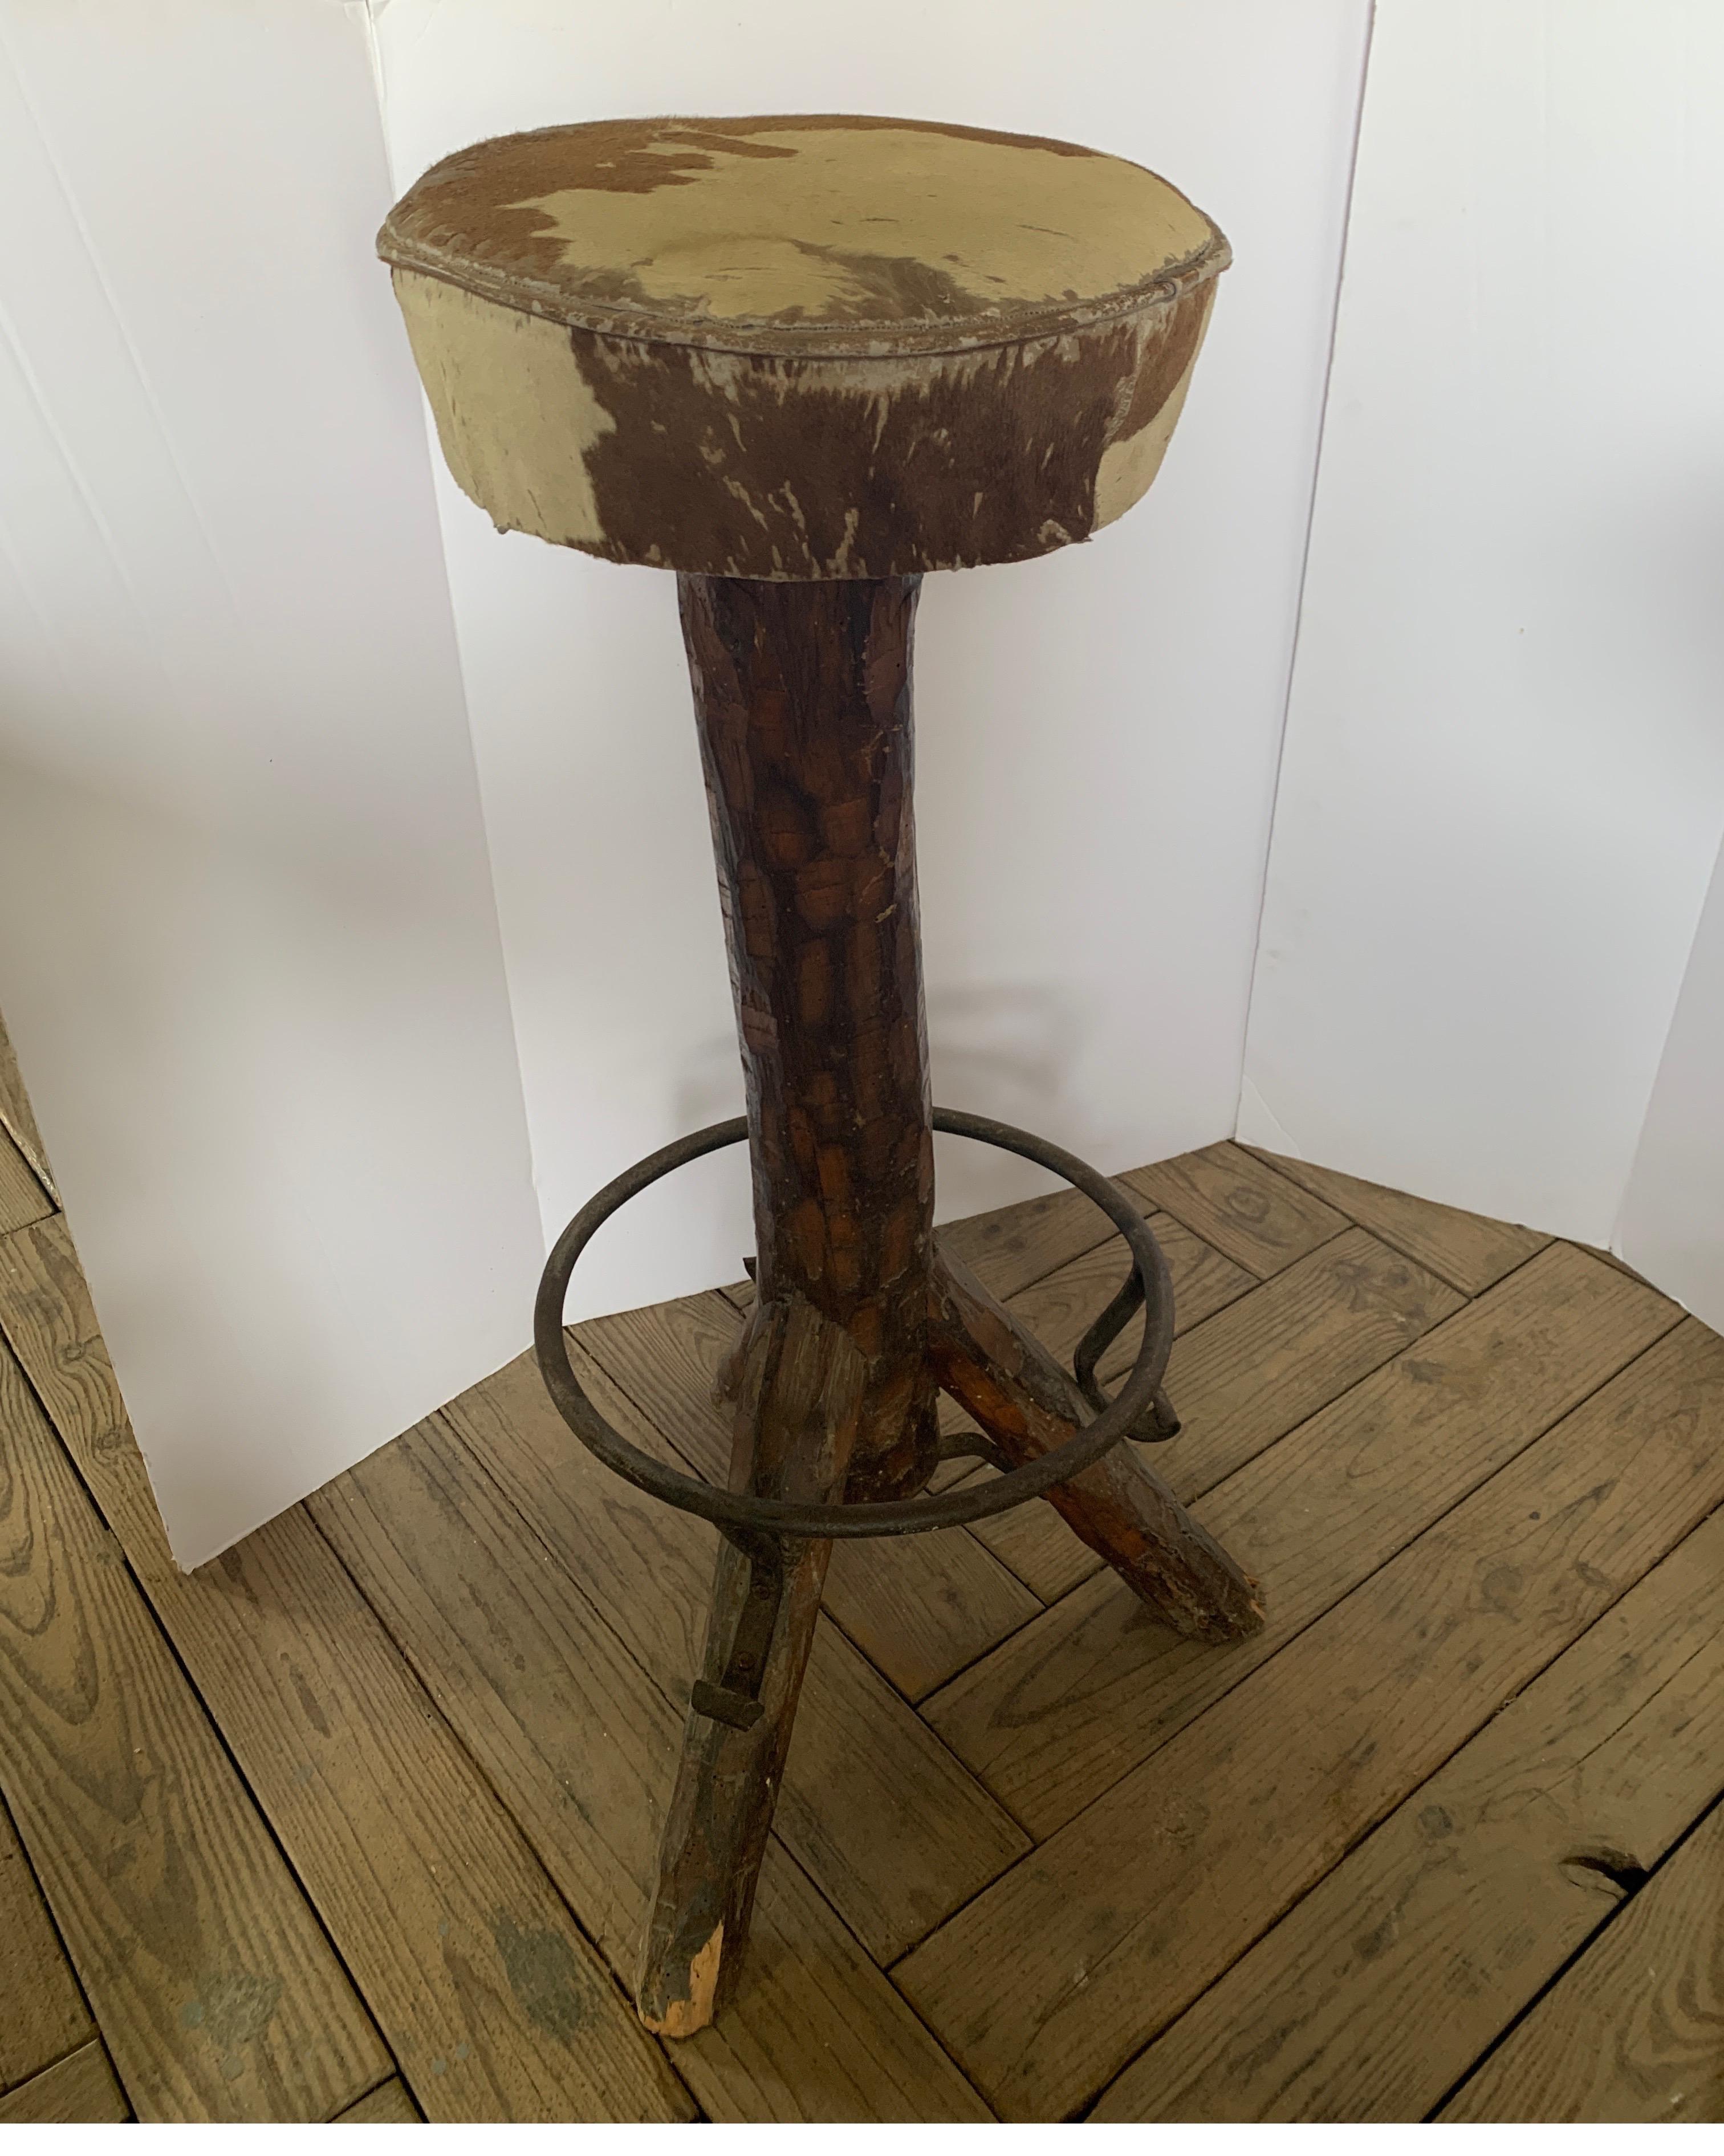 These are super cute rustic barstool with real cowhide covered seats from Spain. They are great for that lodge or country house feel. Seat is 12.5 diameter and bottom base is 14.5 width x 33 tall.